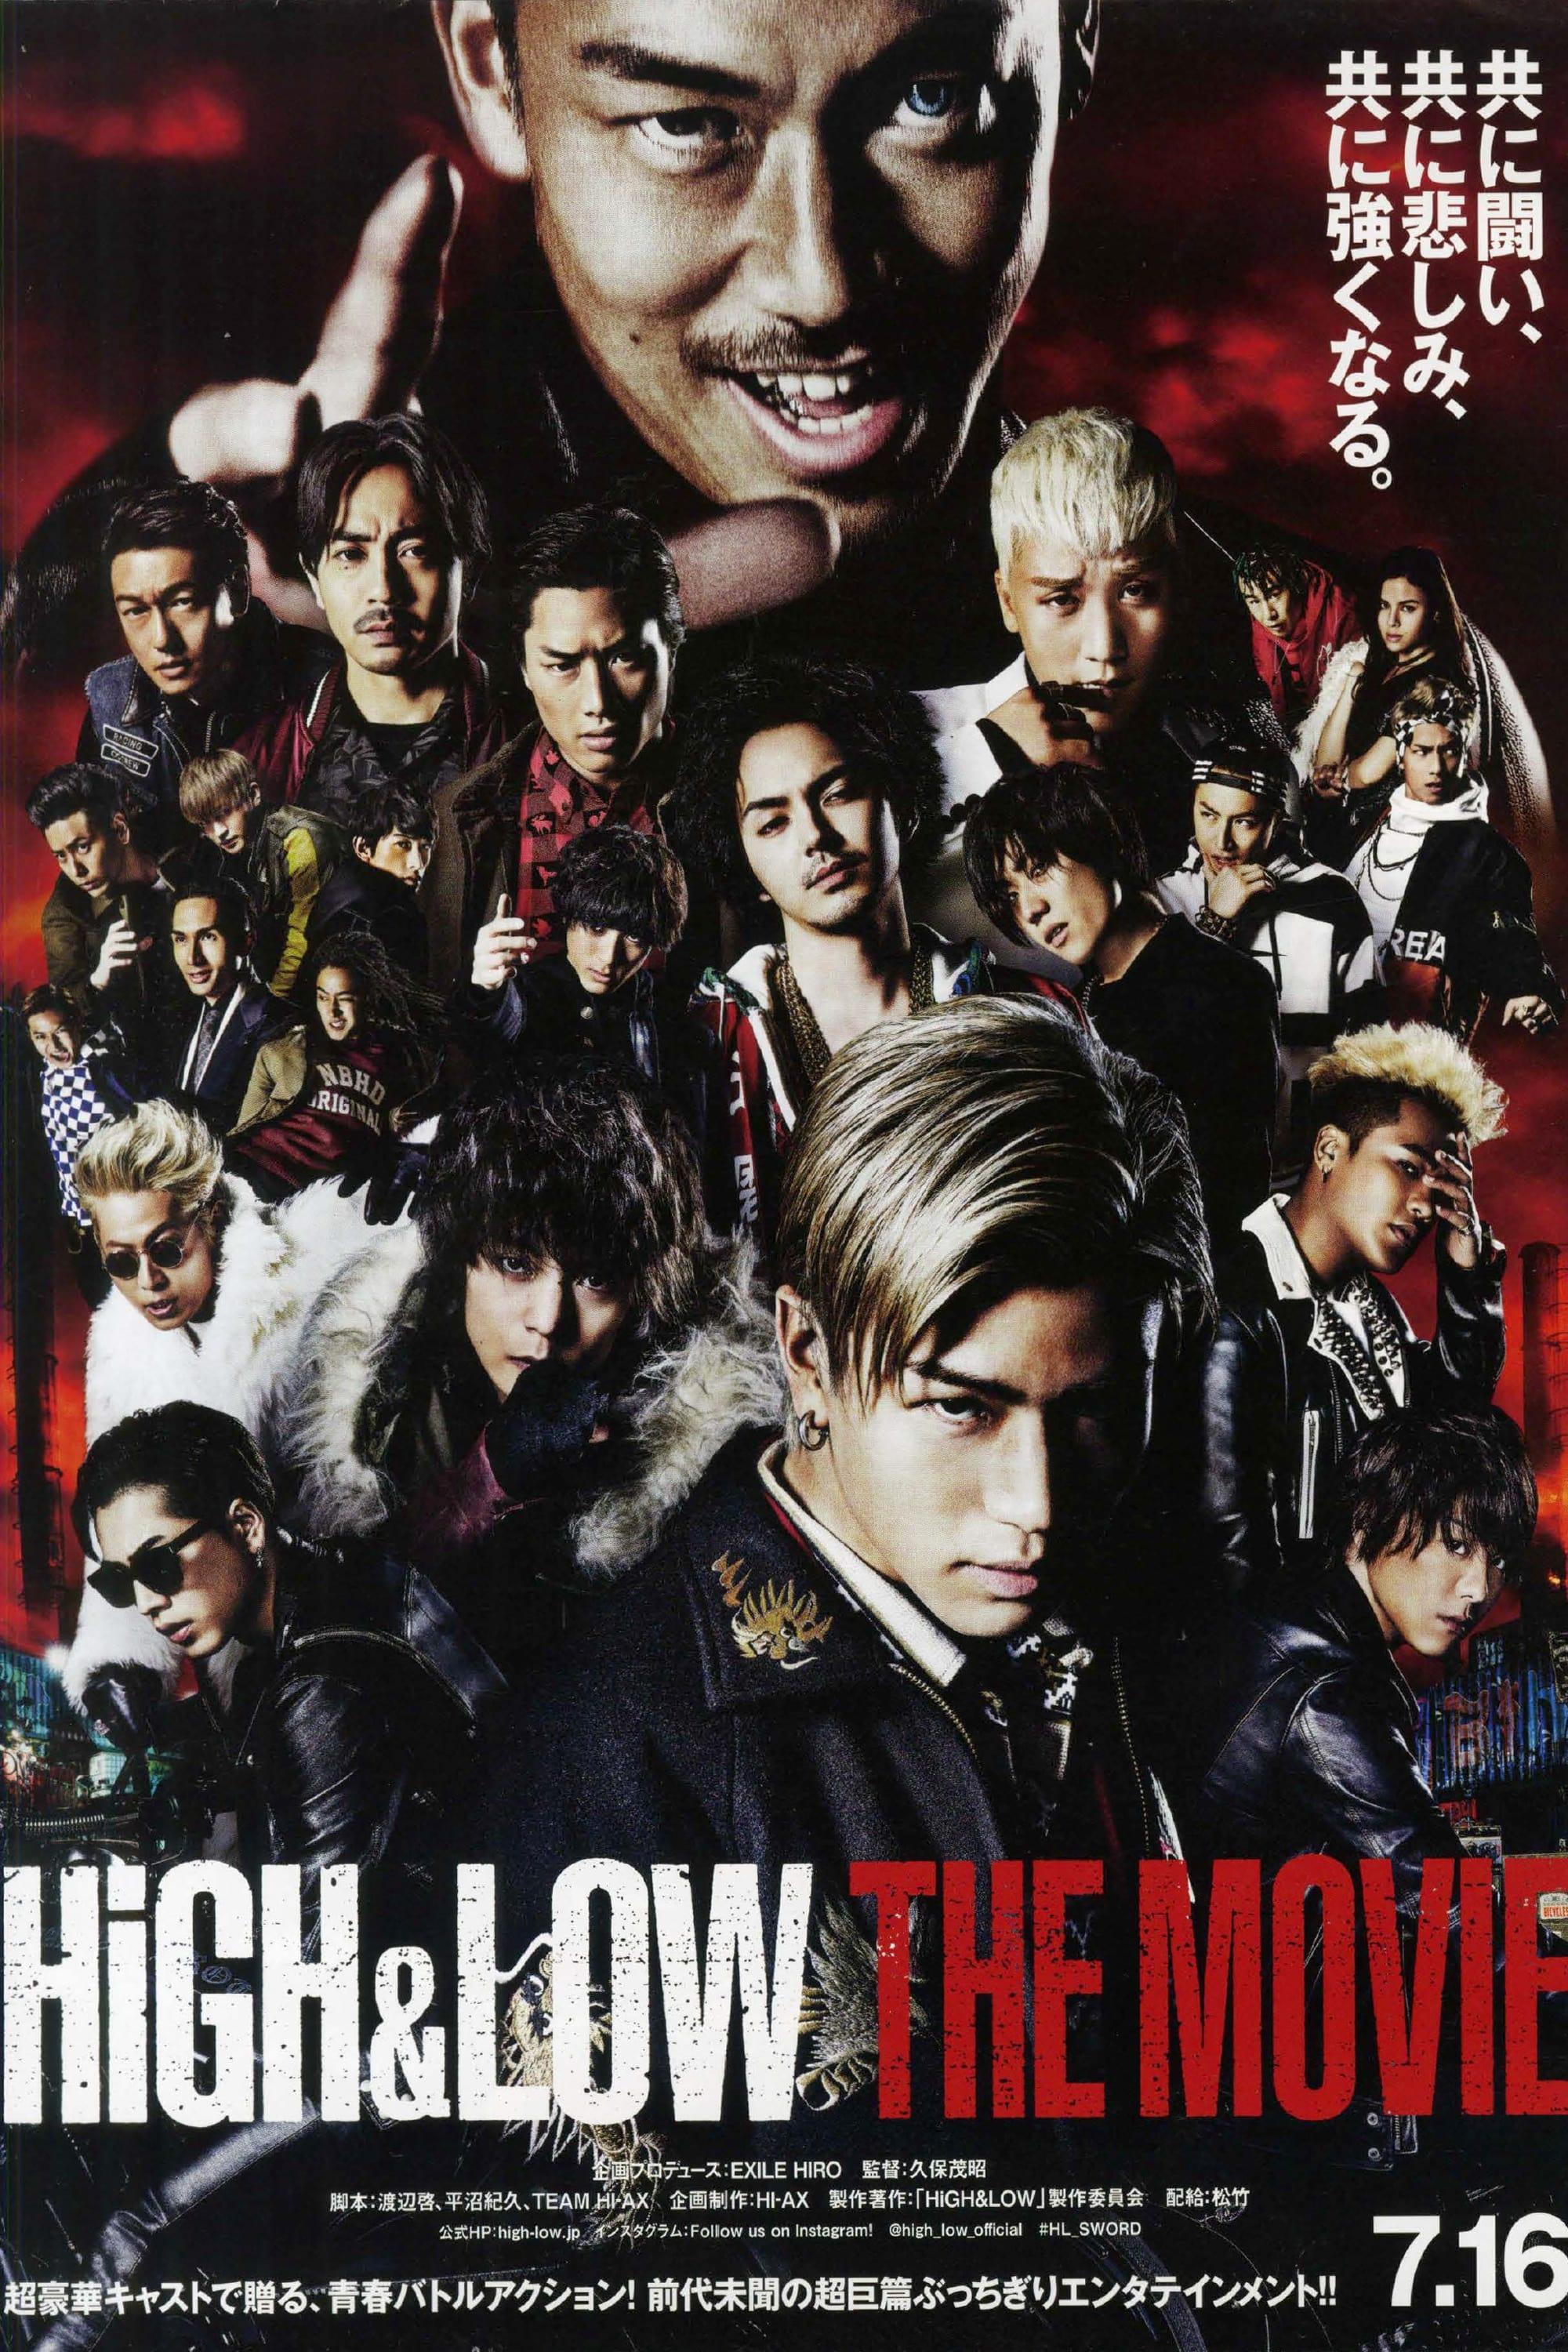 HiGH&LOW THE MOVIE poster